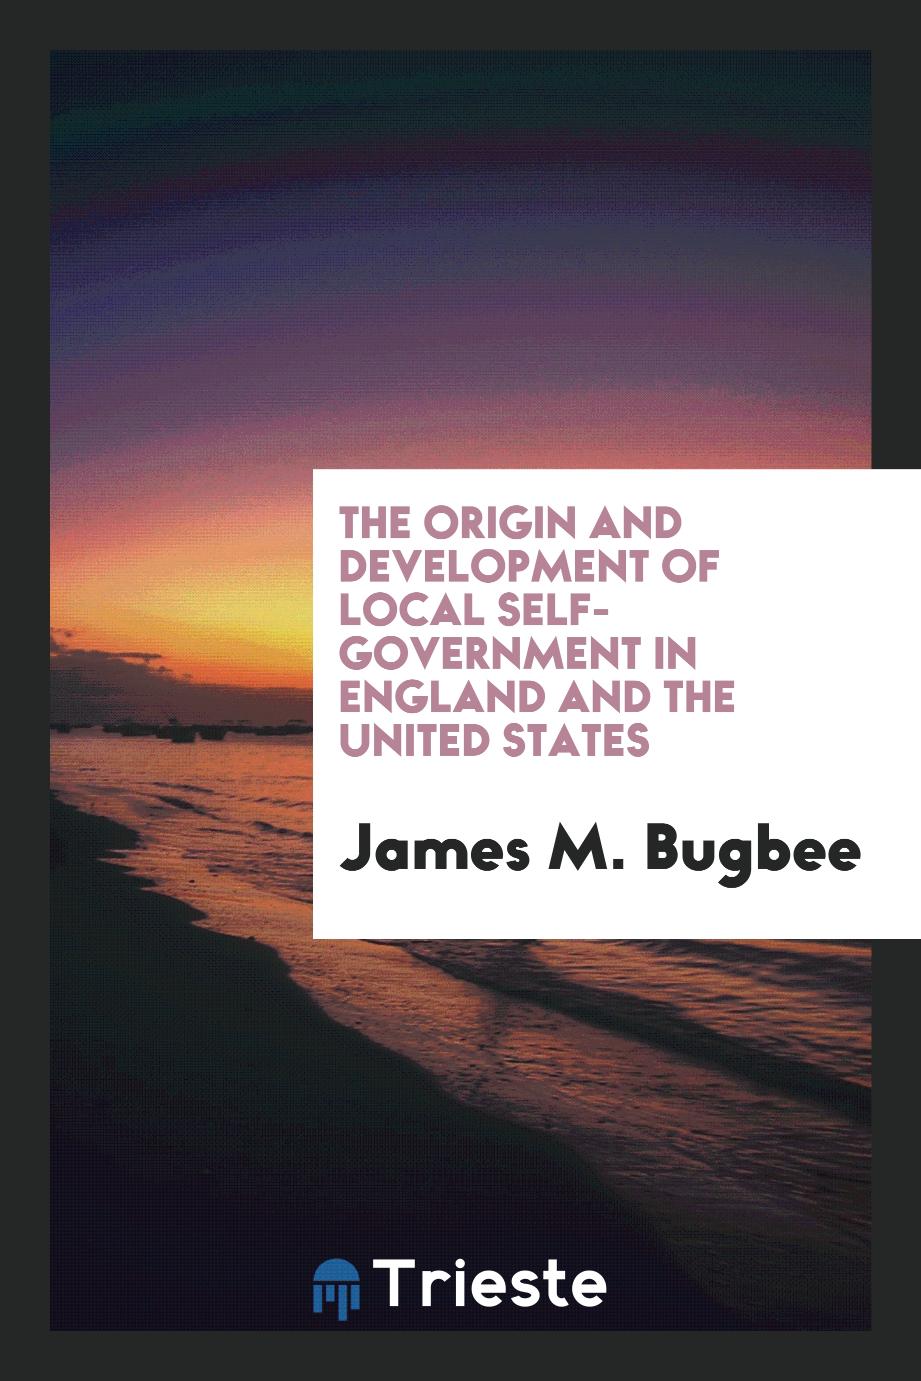 The Origin and Development of Local Self-government in England and the United States